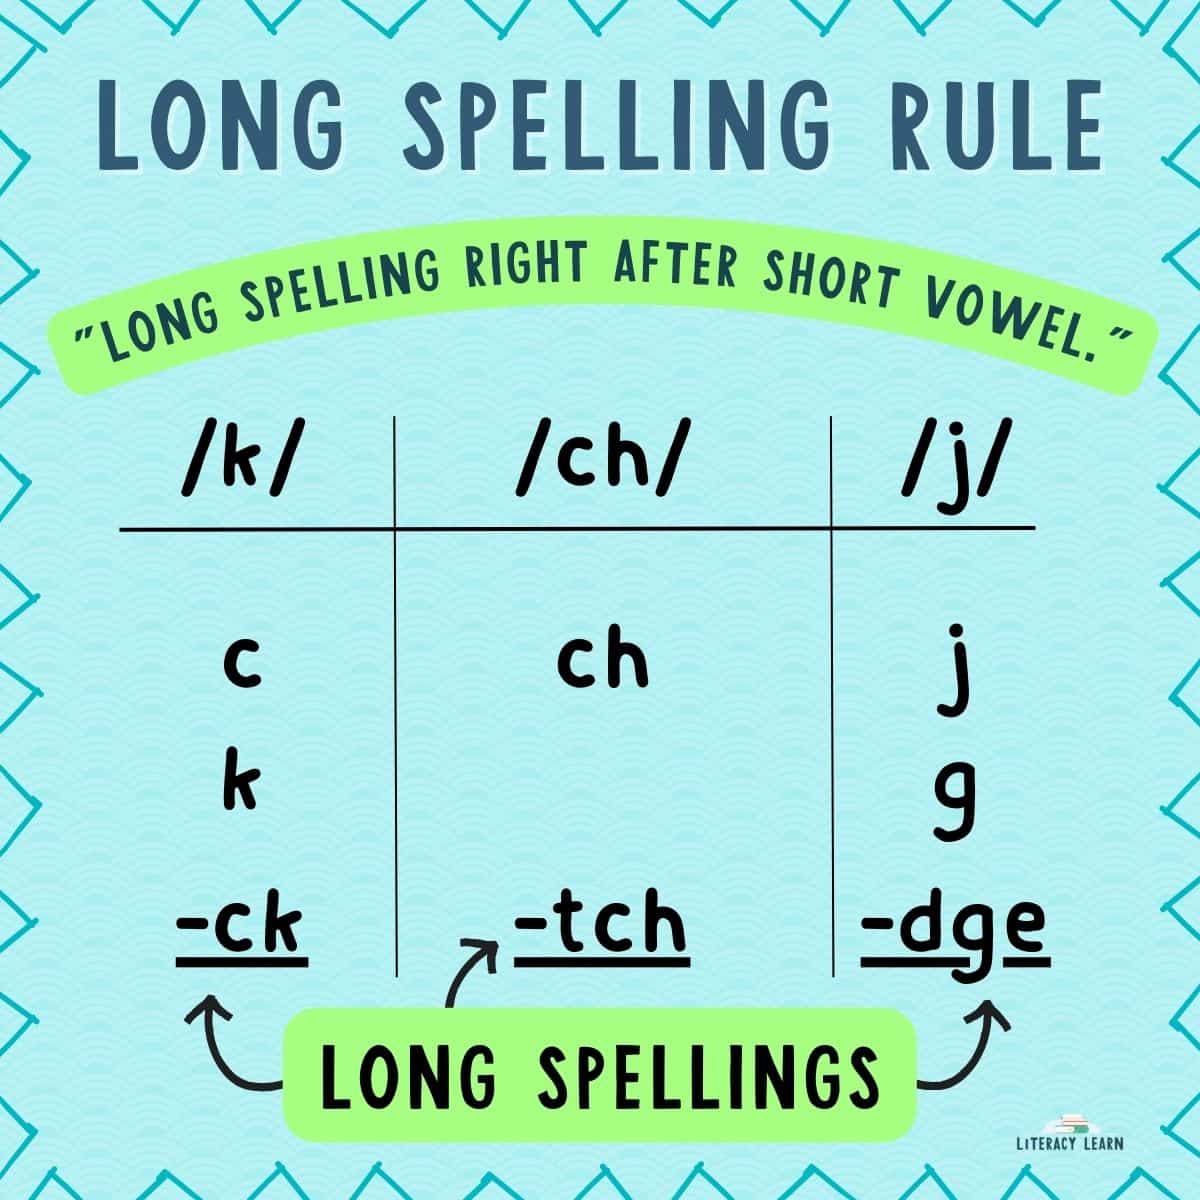 Blue image with the long spelling rule in chart form for  -ck, -tch, and -dge.